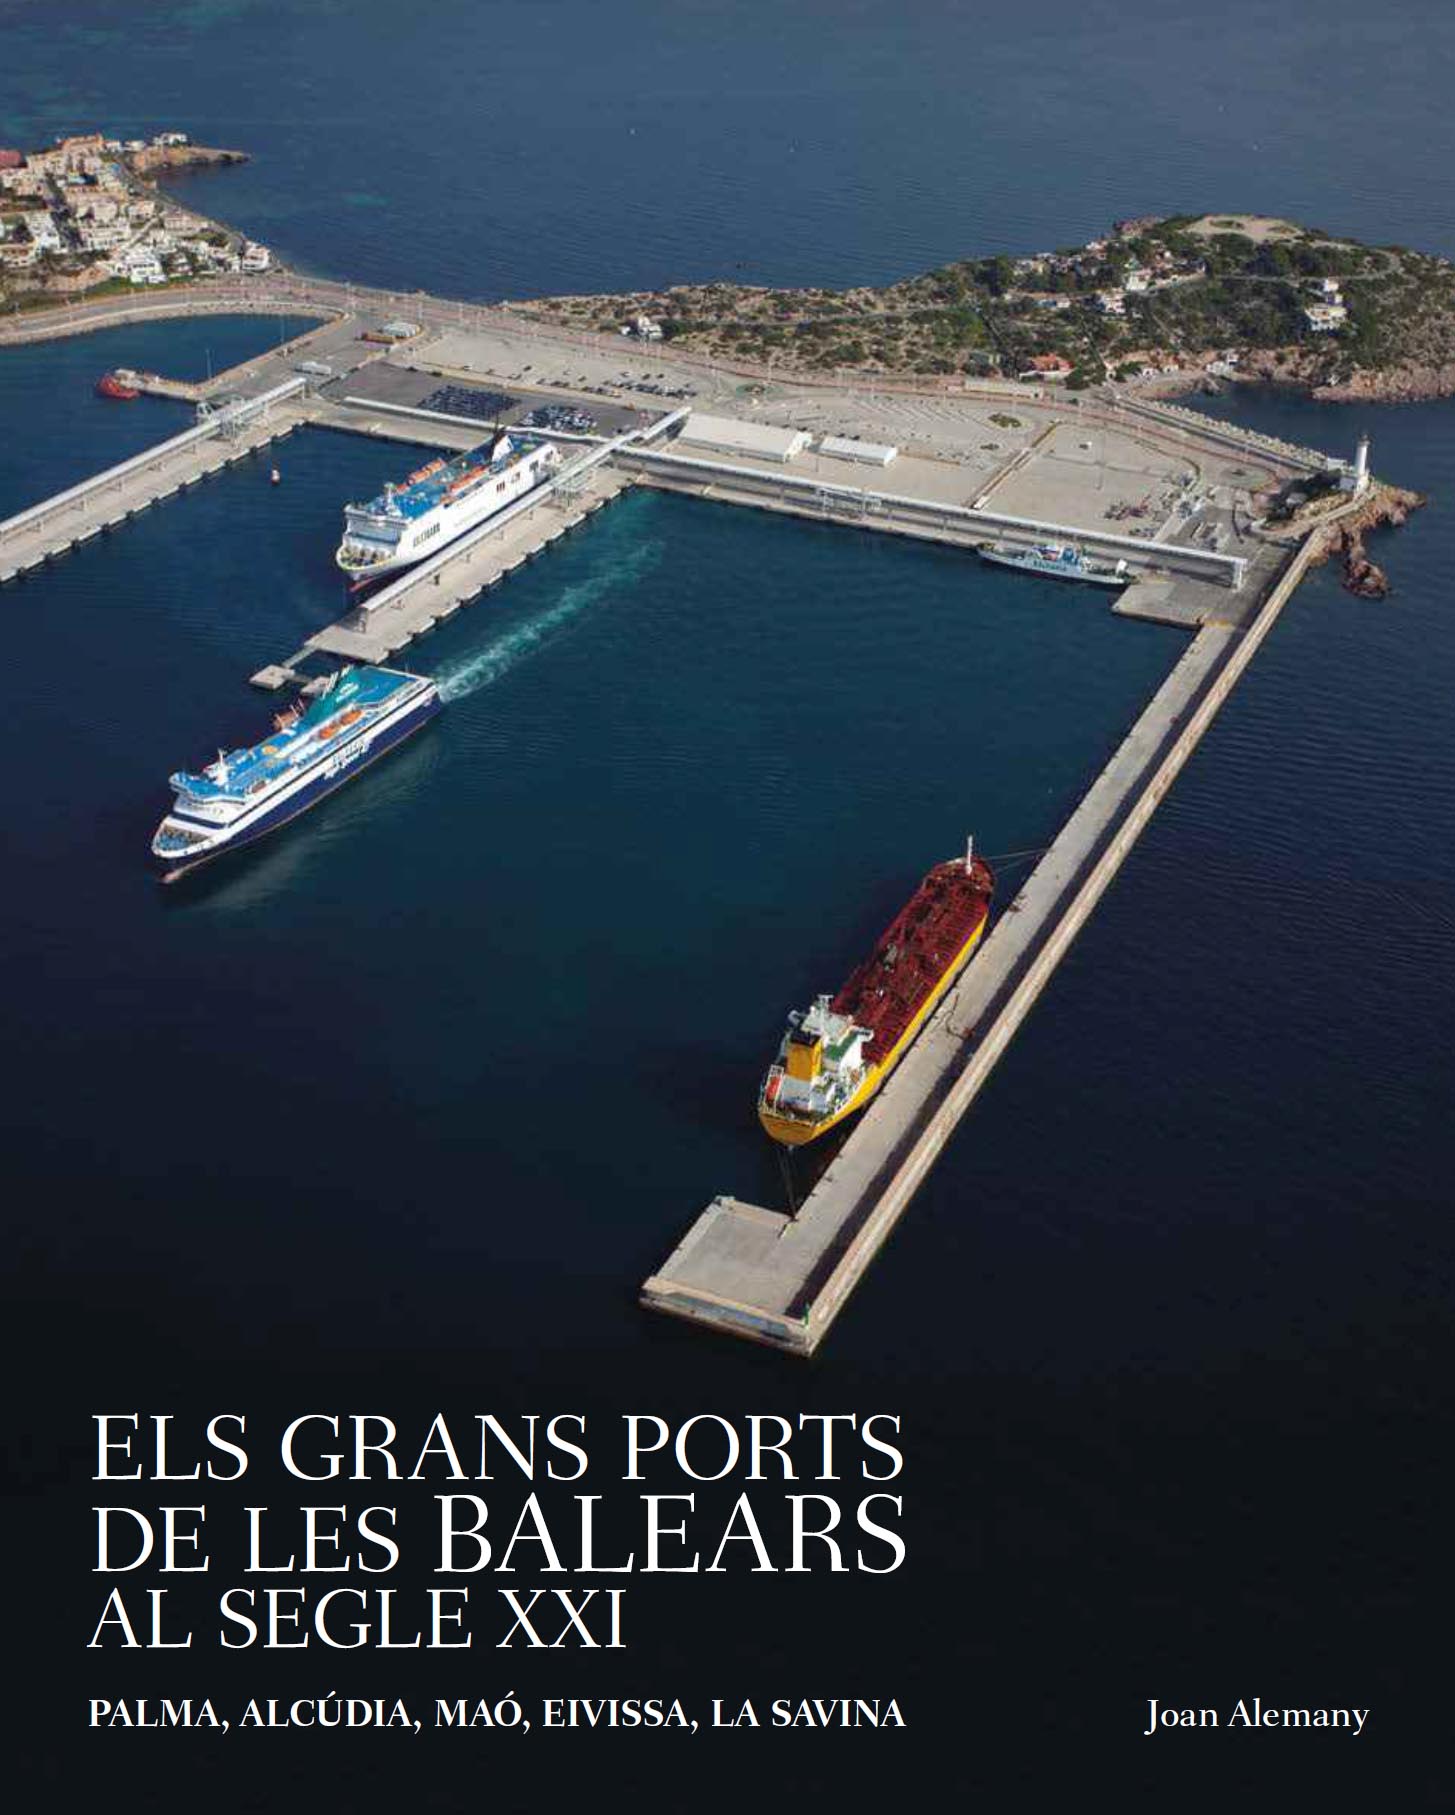 The APB presents the second edition of the book ‘The Main Balearic Island Ports in the 21st Century’